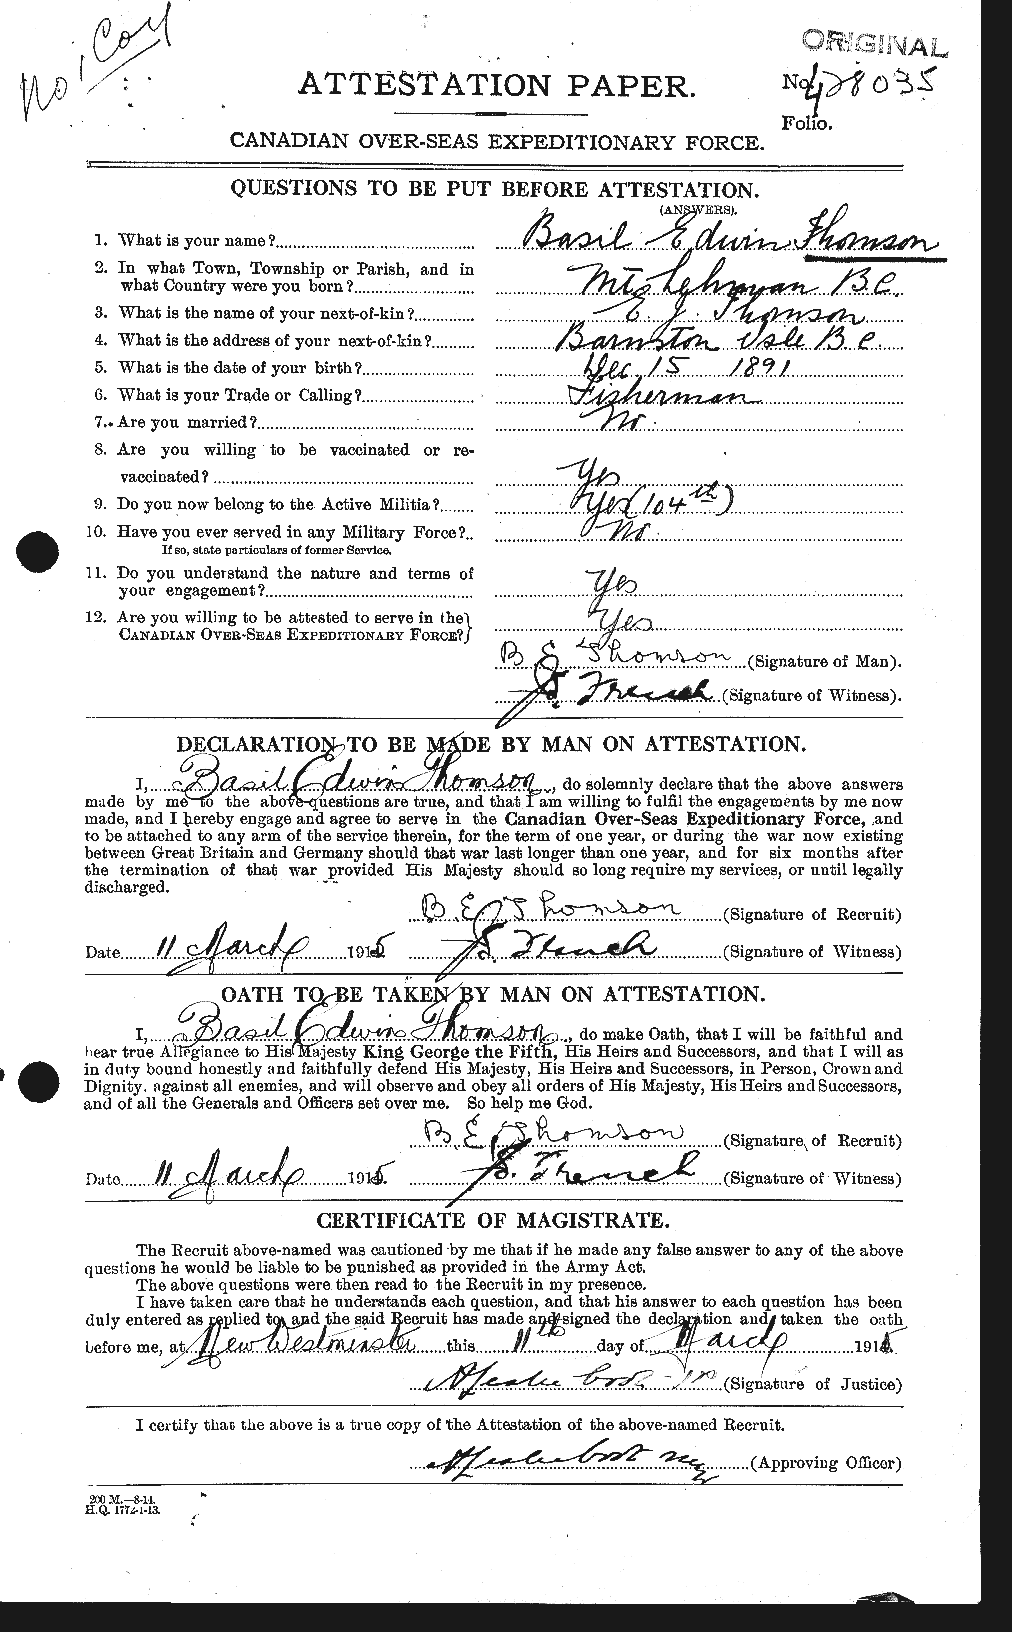 Personnel Records of the First World War - CEF 632281a